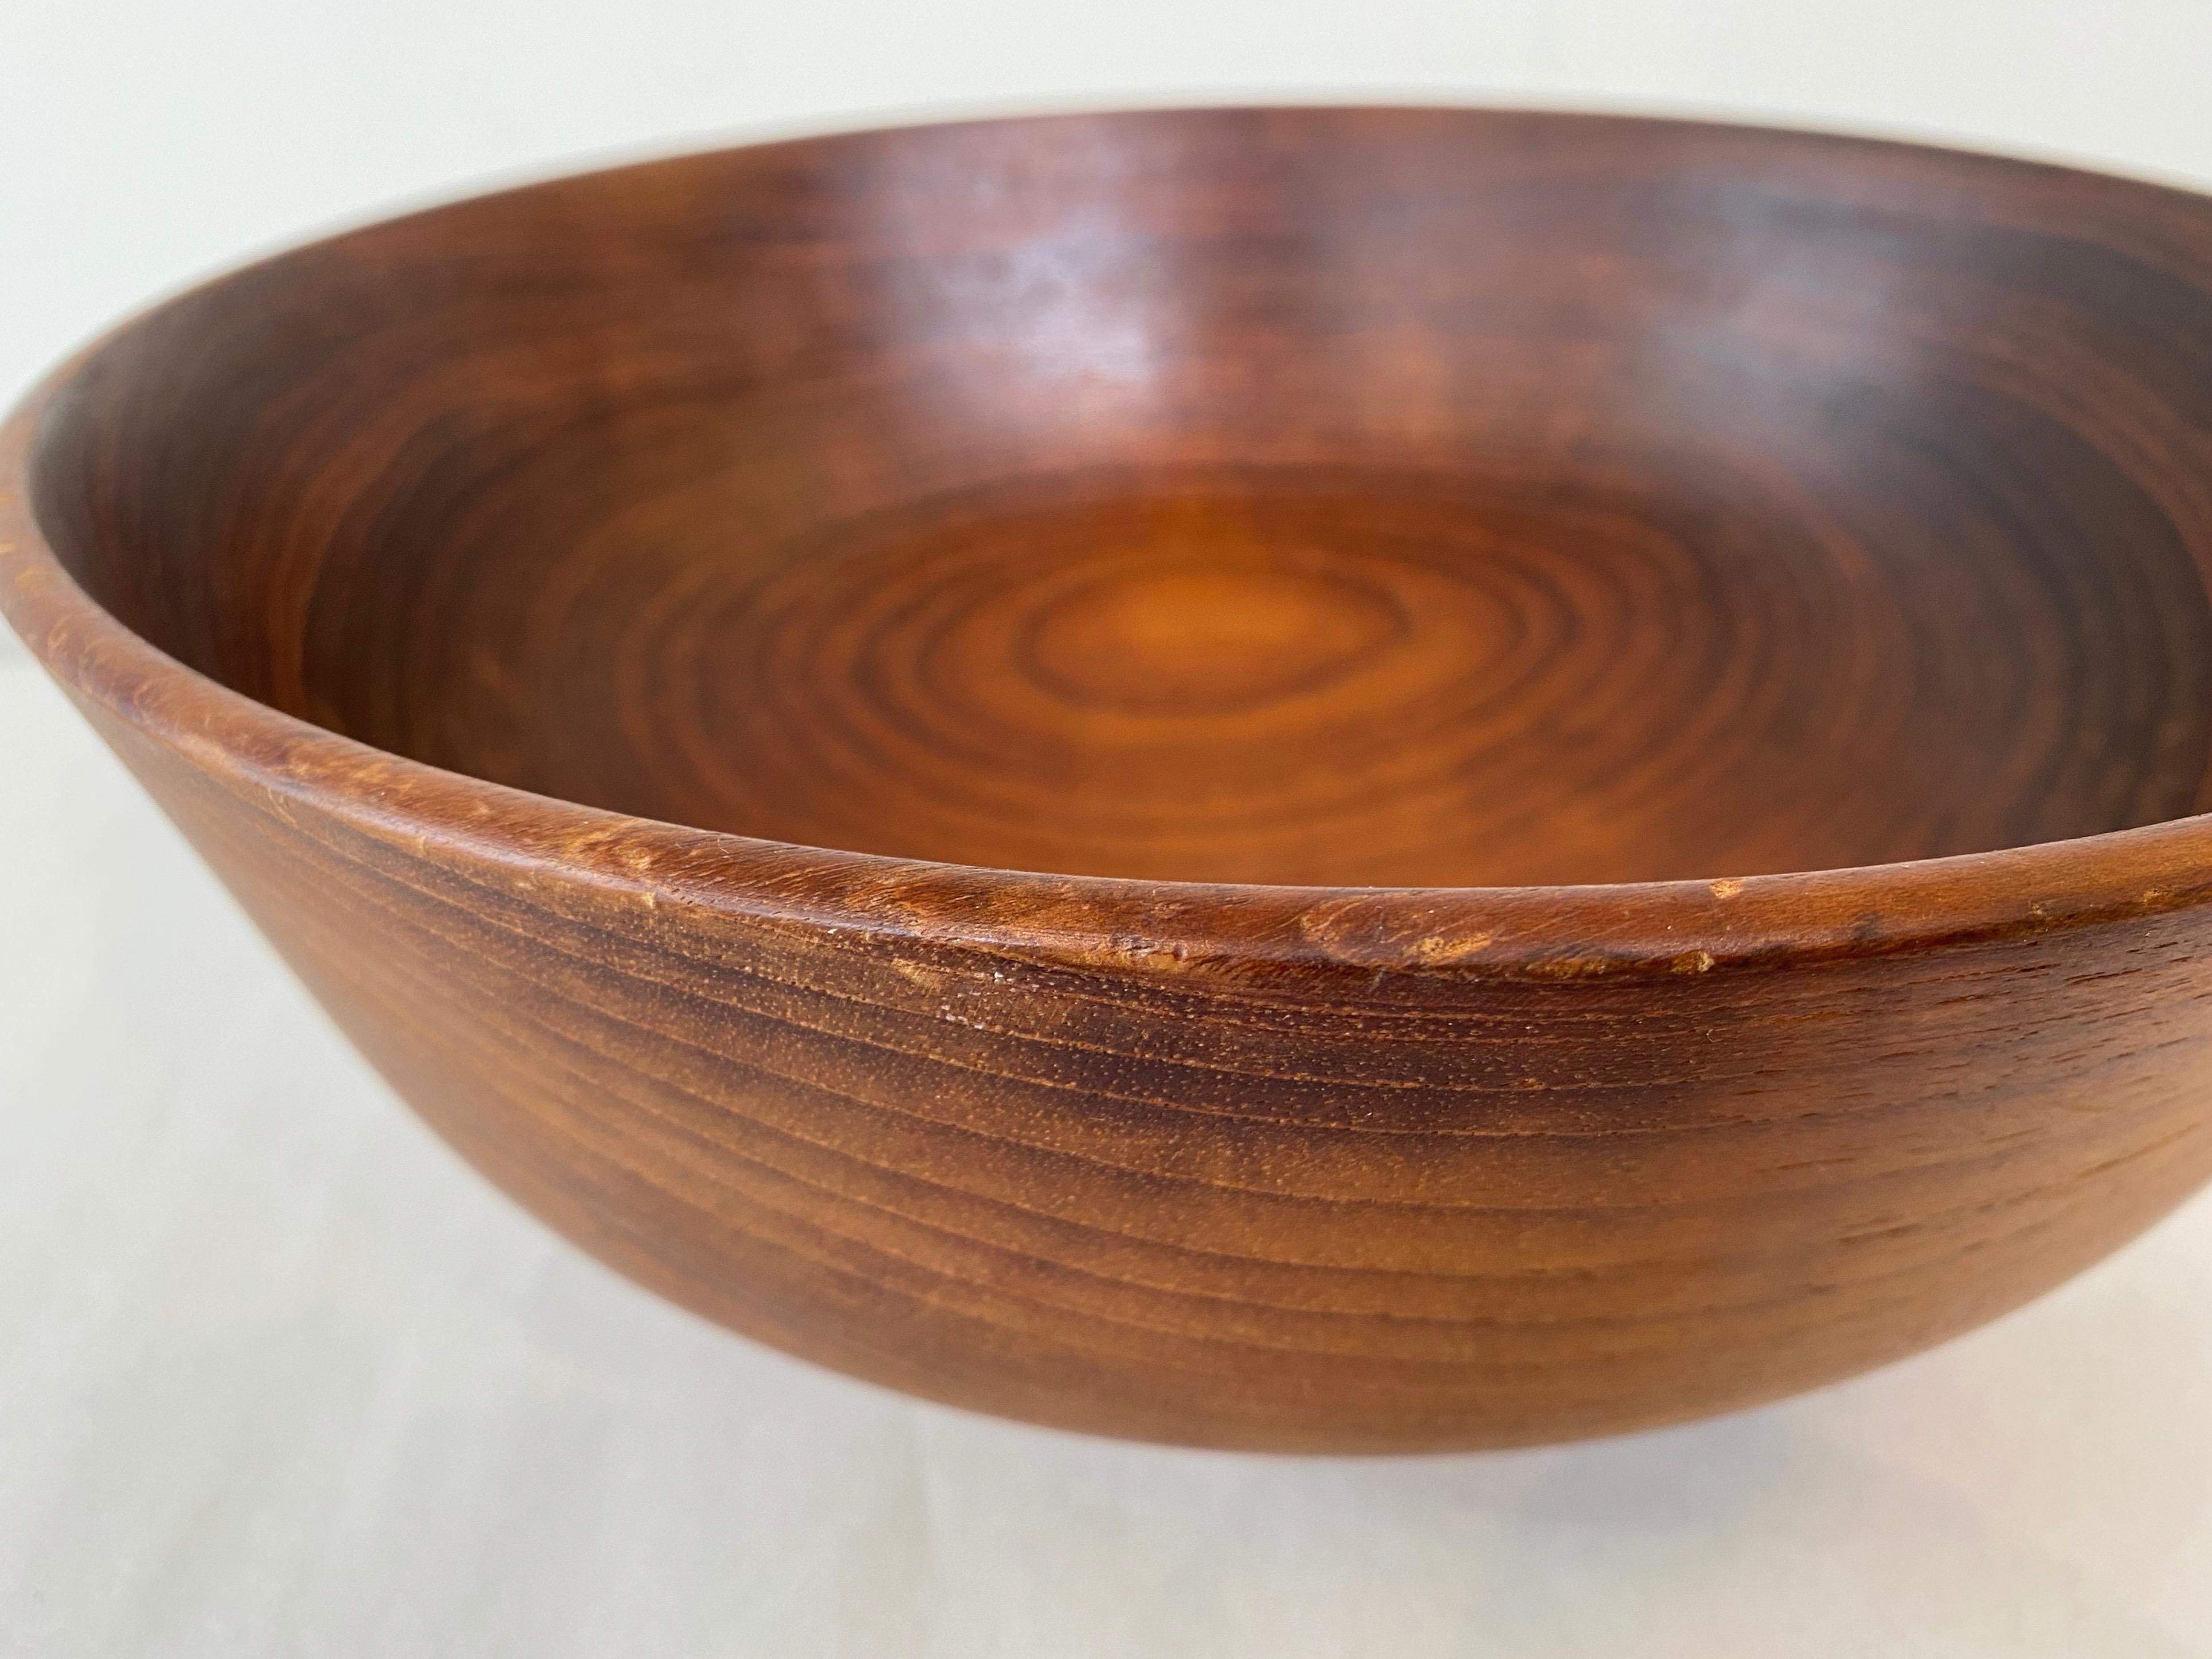 Bob Stocksdale Teak Turned Wood Bowl with Exceptional Grain Pattern, Early 1970s For Sale 9